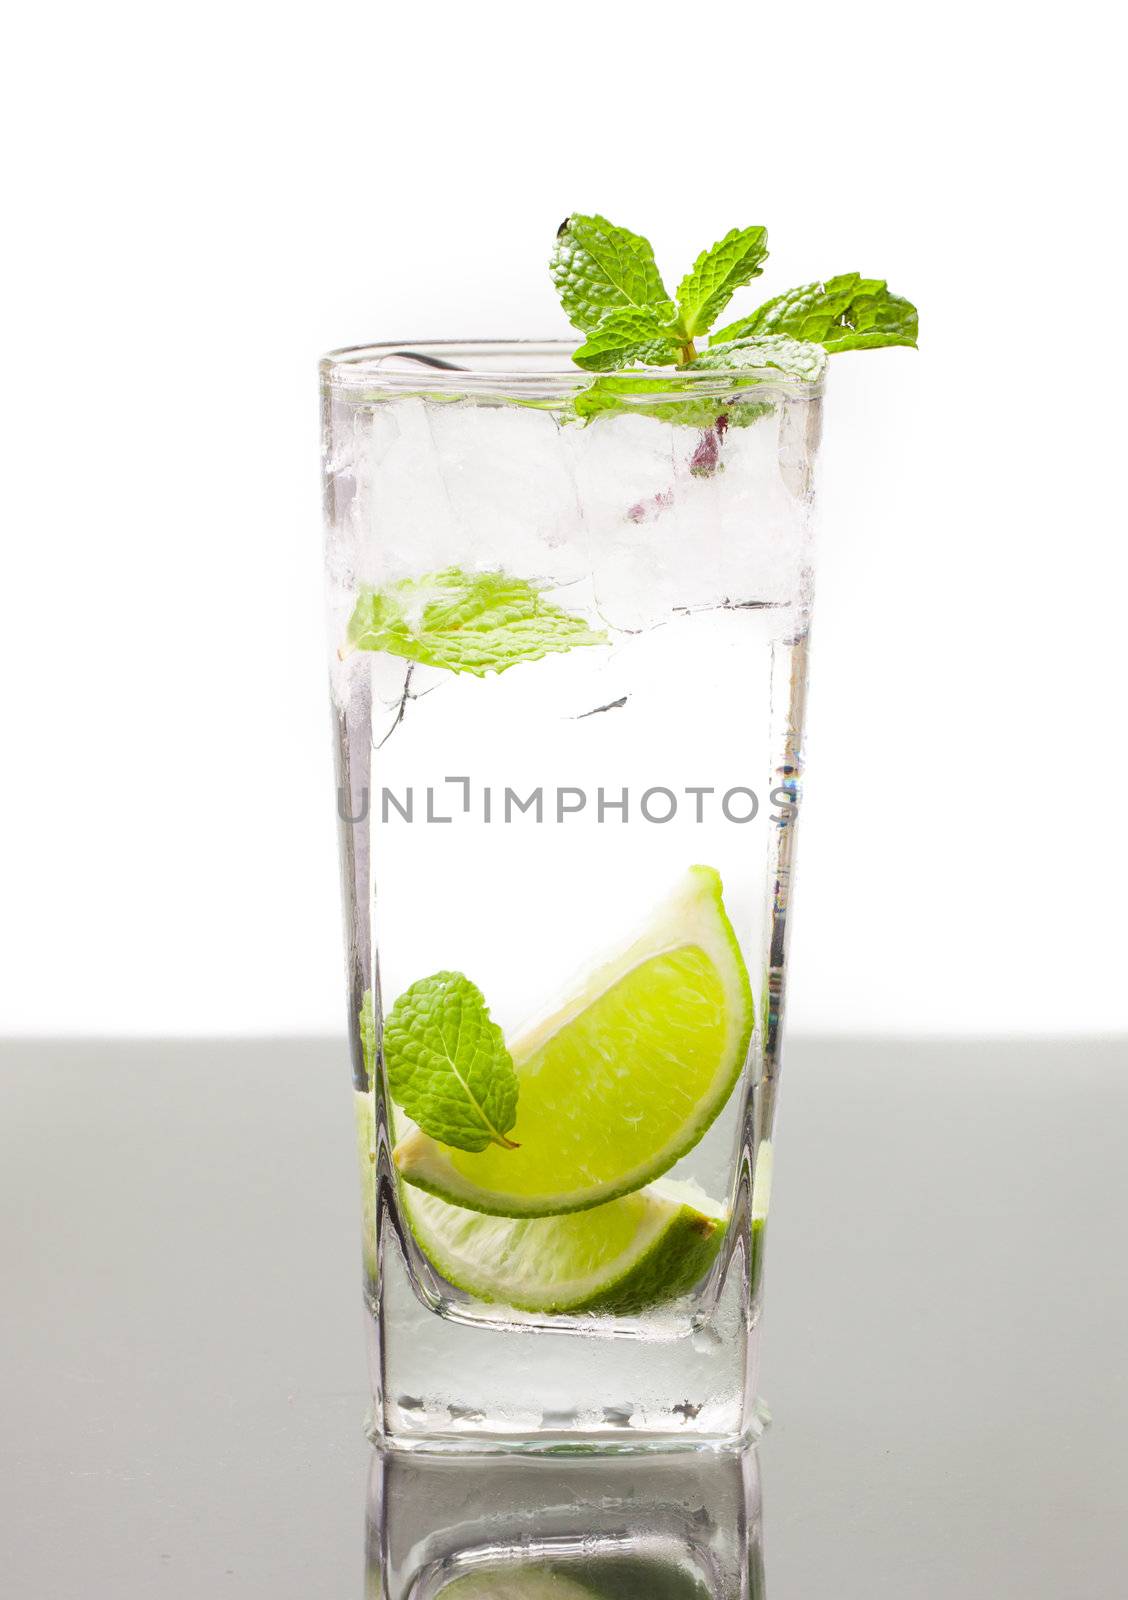 A cold alcoholic drink, mojito, with lime, mint soda and ice. On table with refelction and isolated over white